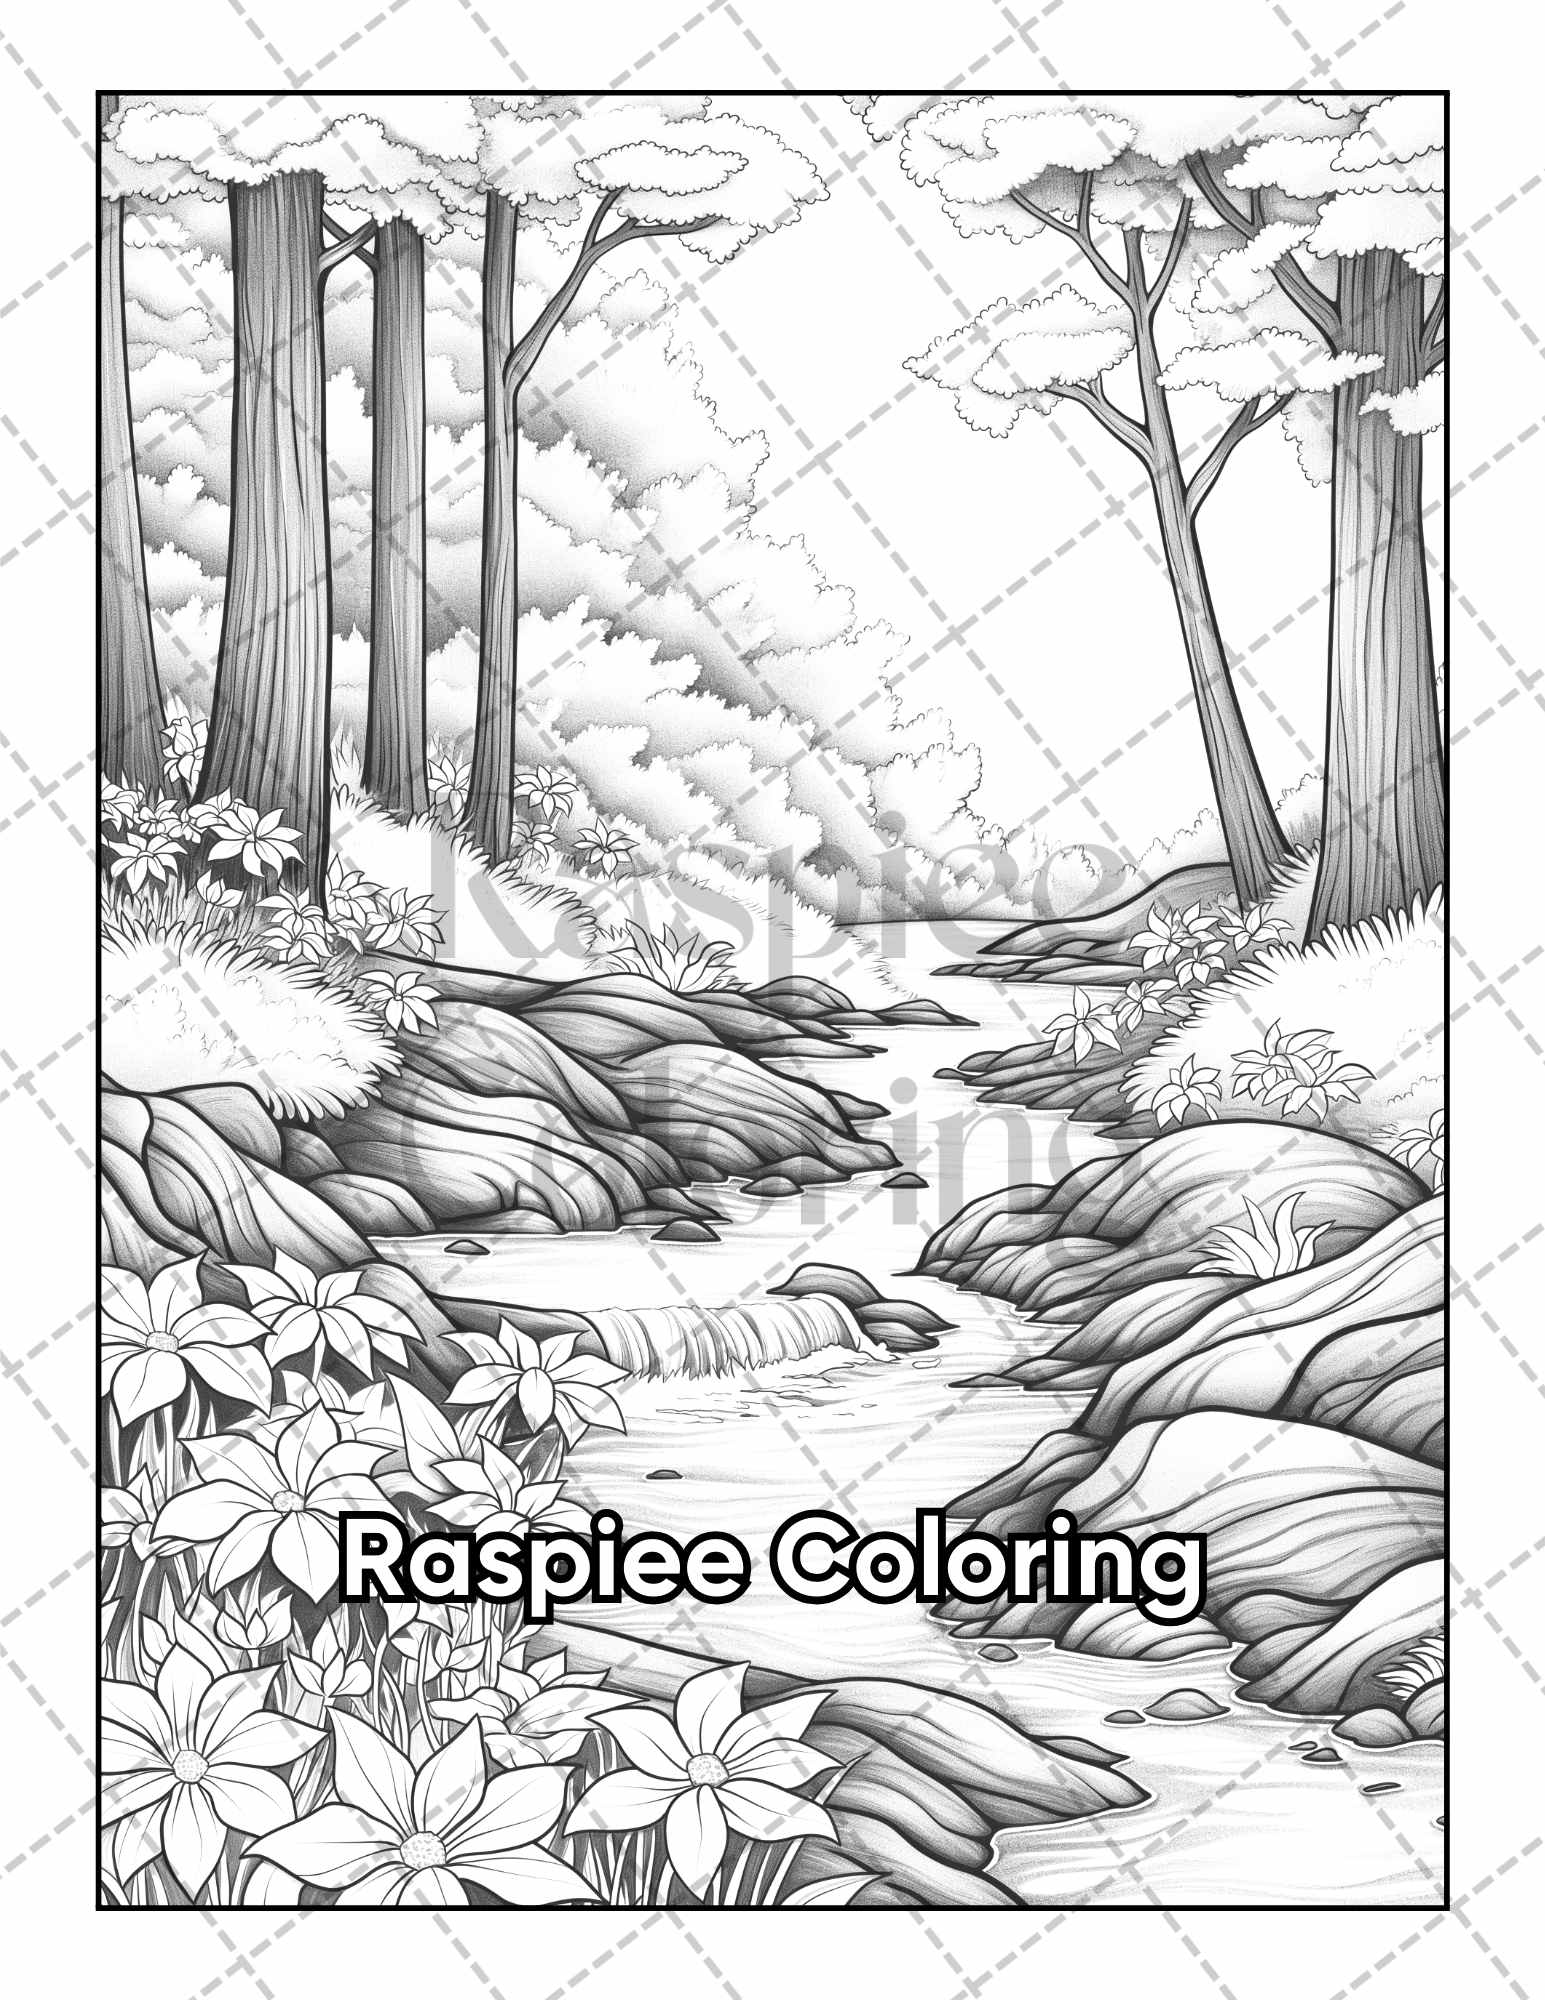 50 Spring Serenity Adult Coloring Pages - Printable PDF Instant Download for Stress Relief